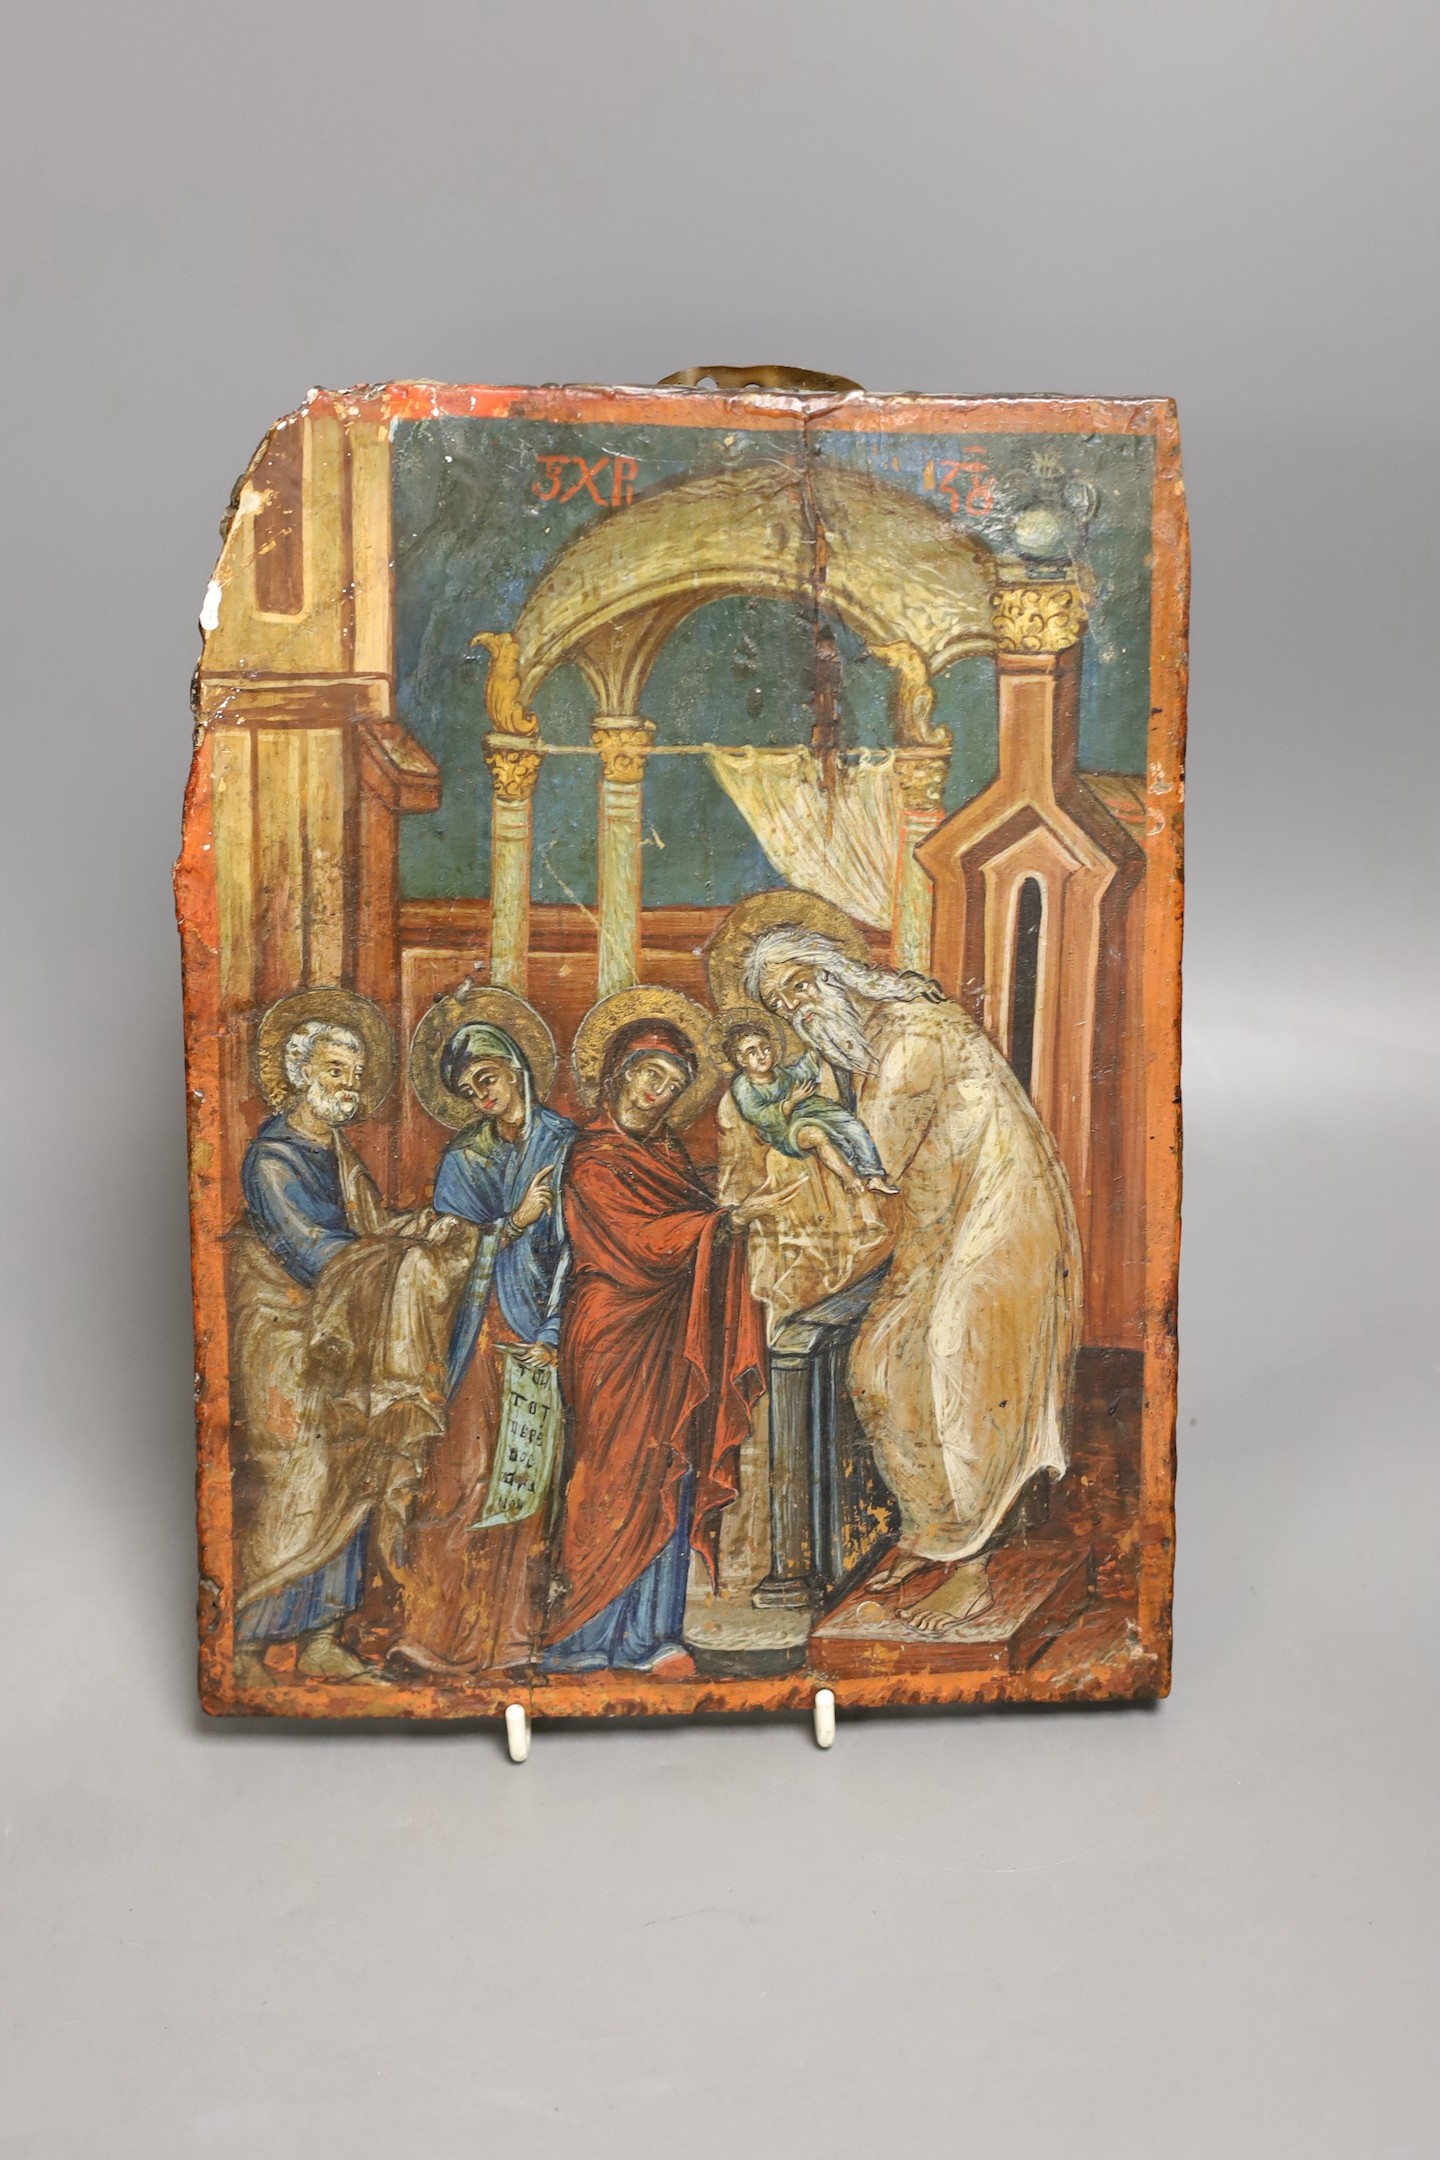 A 19th century Russian icon plaque painted on wood - 30 x 22cm